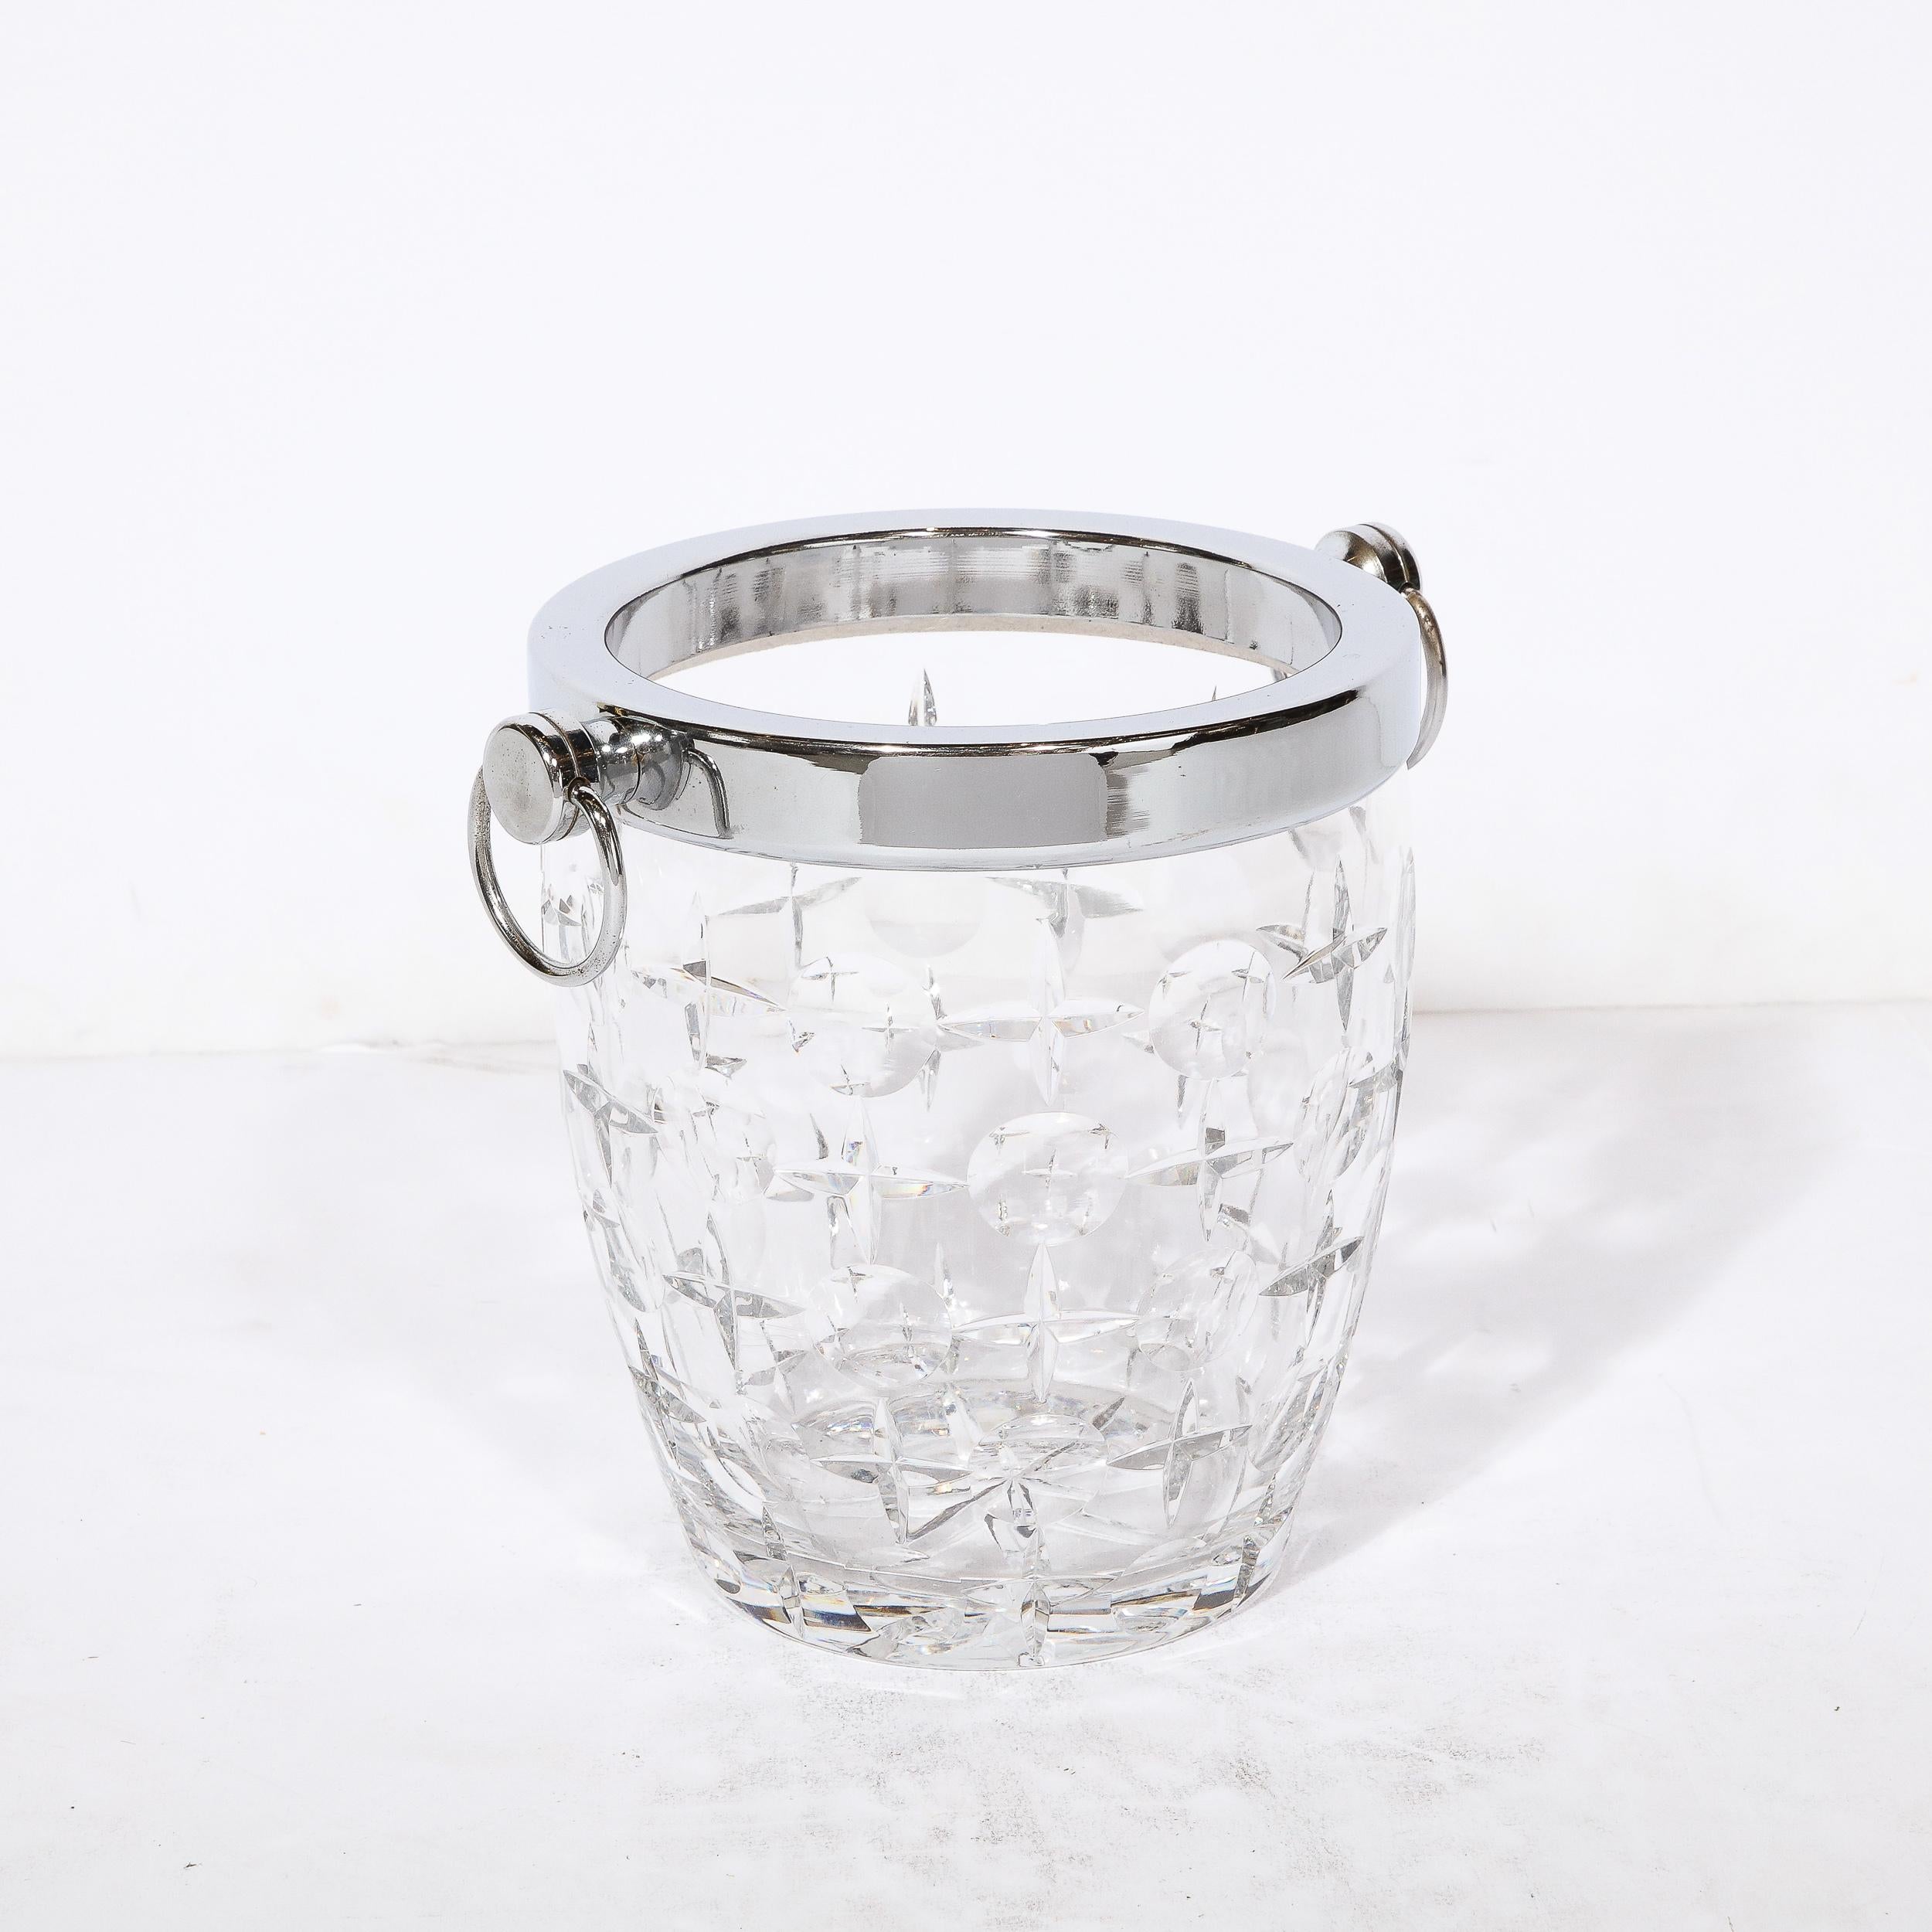 French Mid-Century Modernist Cut Crystal Ice Bucket with Chrome Fittings & Loop Handles For Sale